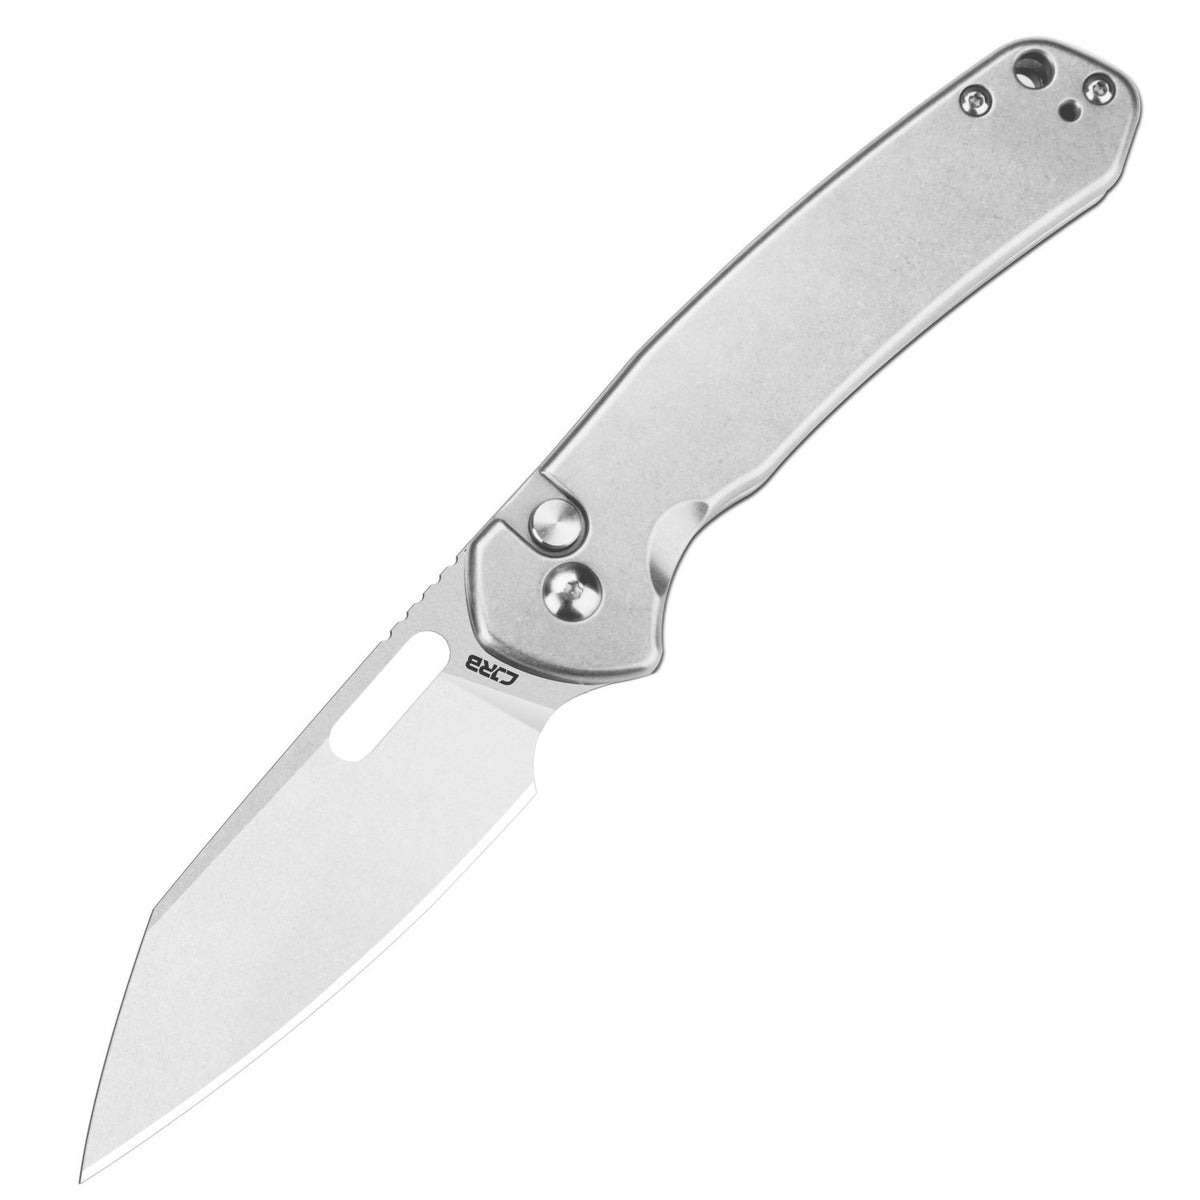 PSA] Knives + saltwater are a bad combination : r/knives